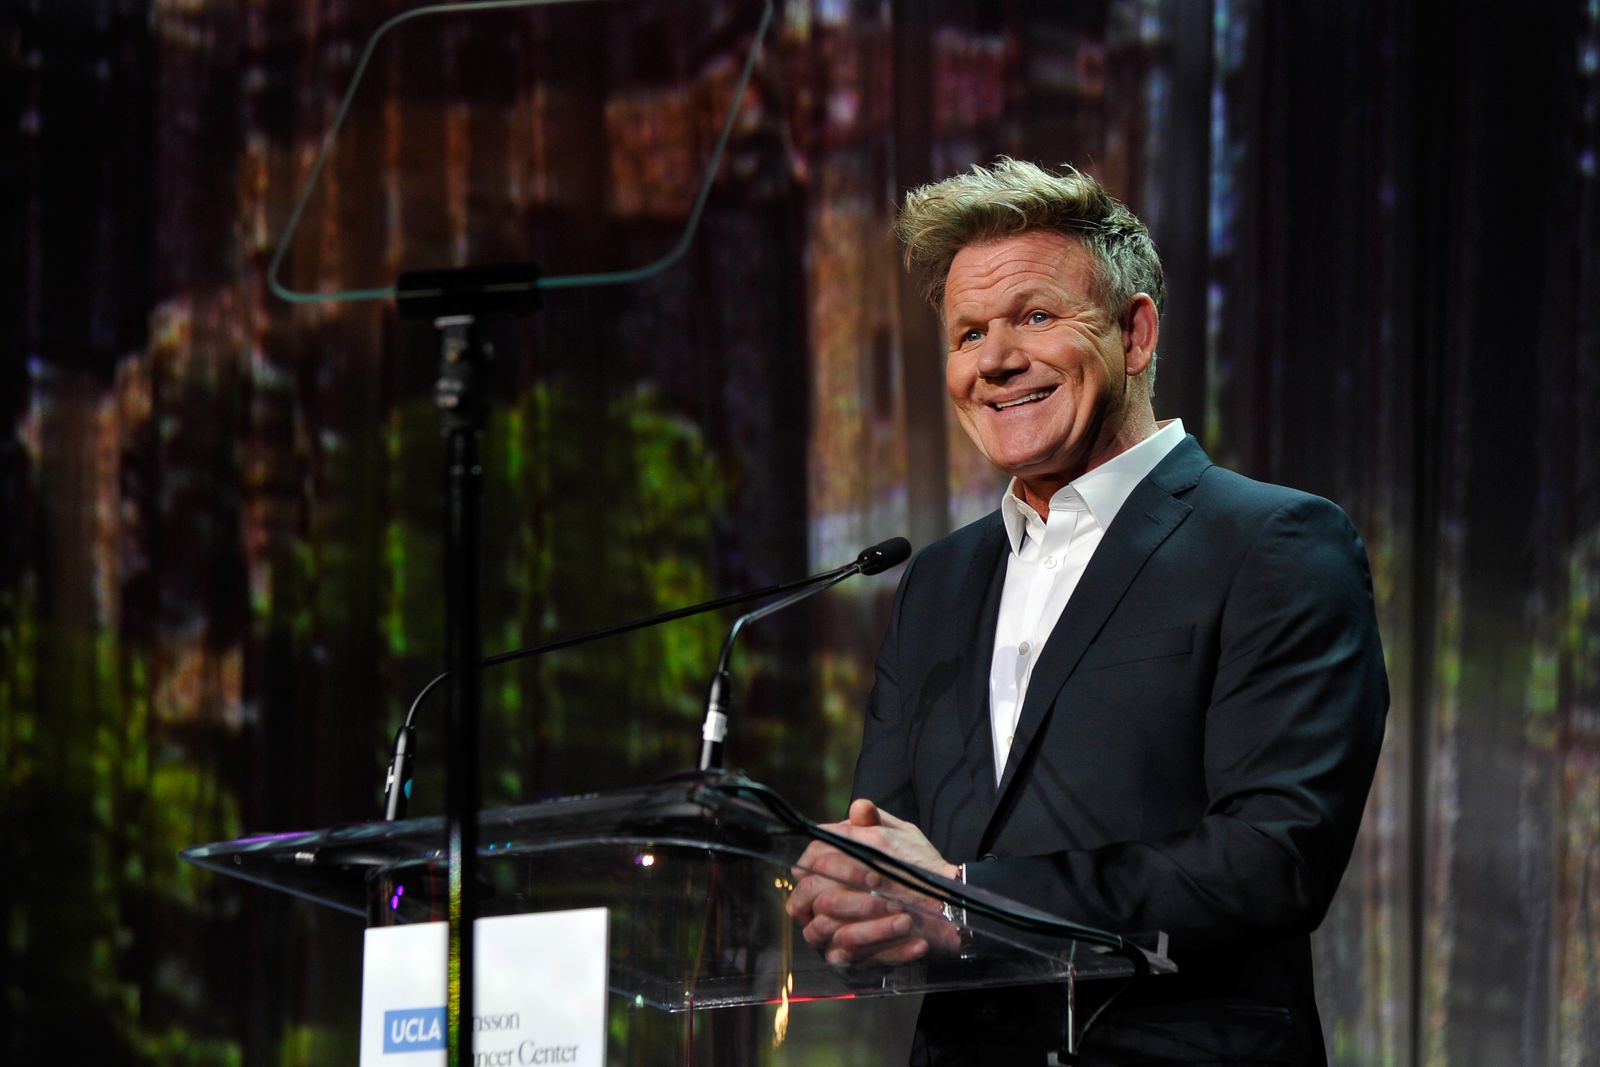 Gordon Ramsay speaks during UCLA Jonsson Cancer Center Foundation Hosts 23rd Annual "Taste for a Cure" Event on April 27, 2018 | Photo: Getty Images